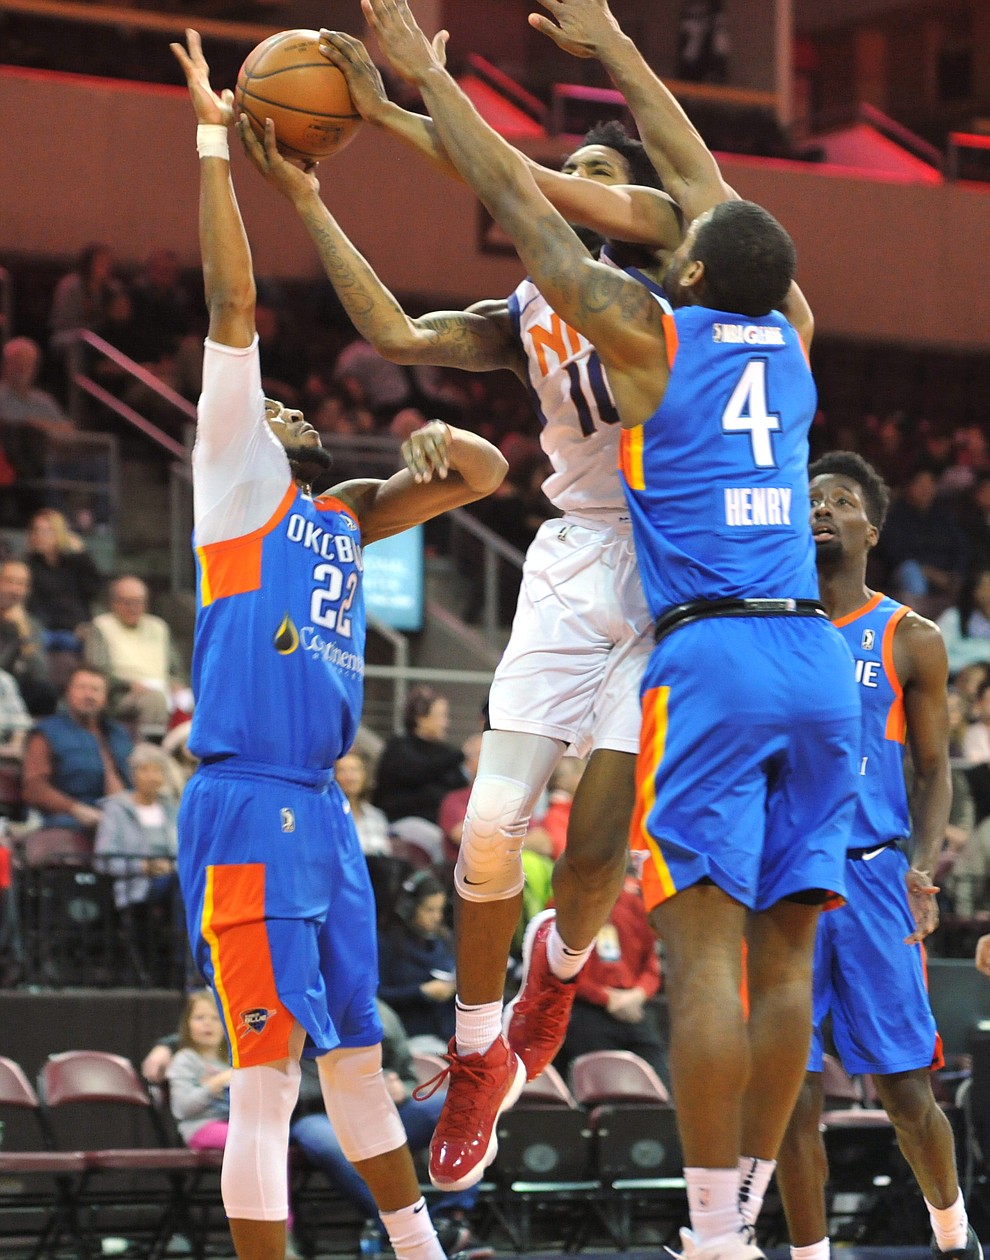 Northern Arizona's Derrick Jones Jr. splits a pair of defenders as the Suns take on the Oklahoma City Blue Friday night at the Prescott Valley Event Center.  (Les Stukenberg/Courier)